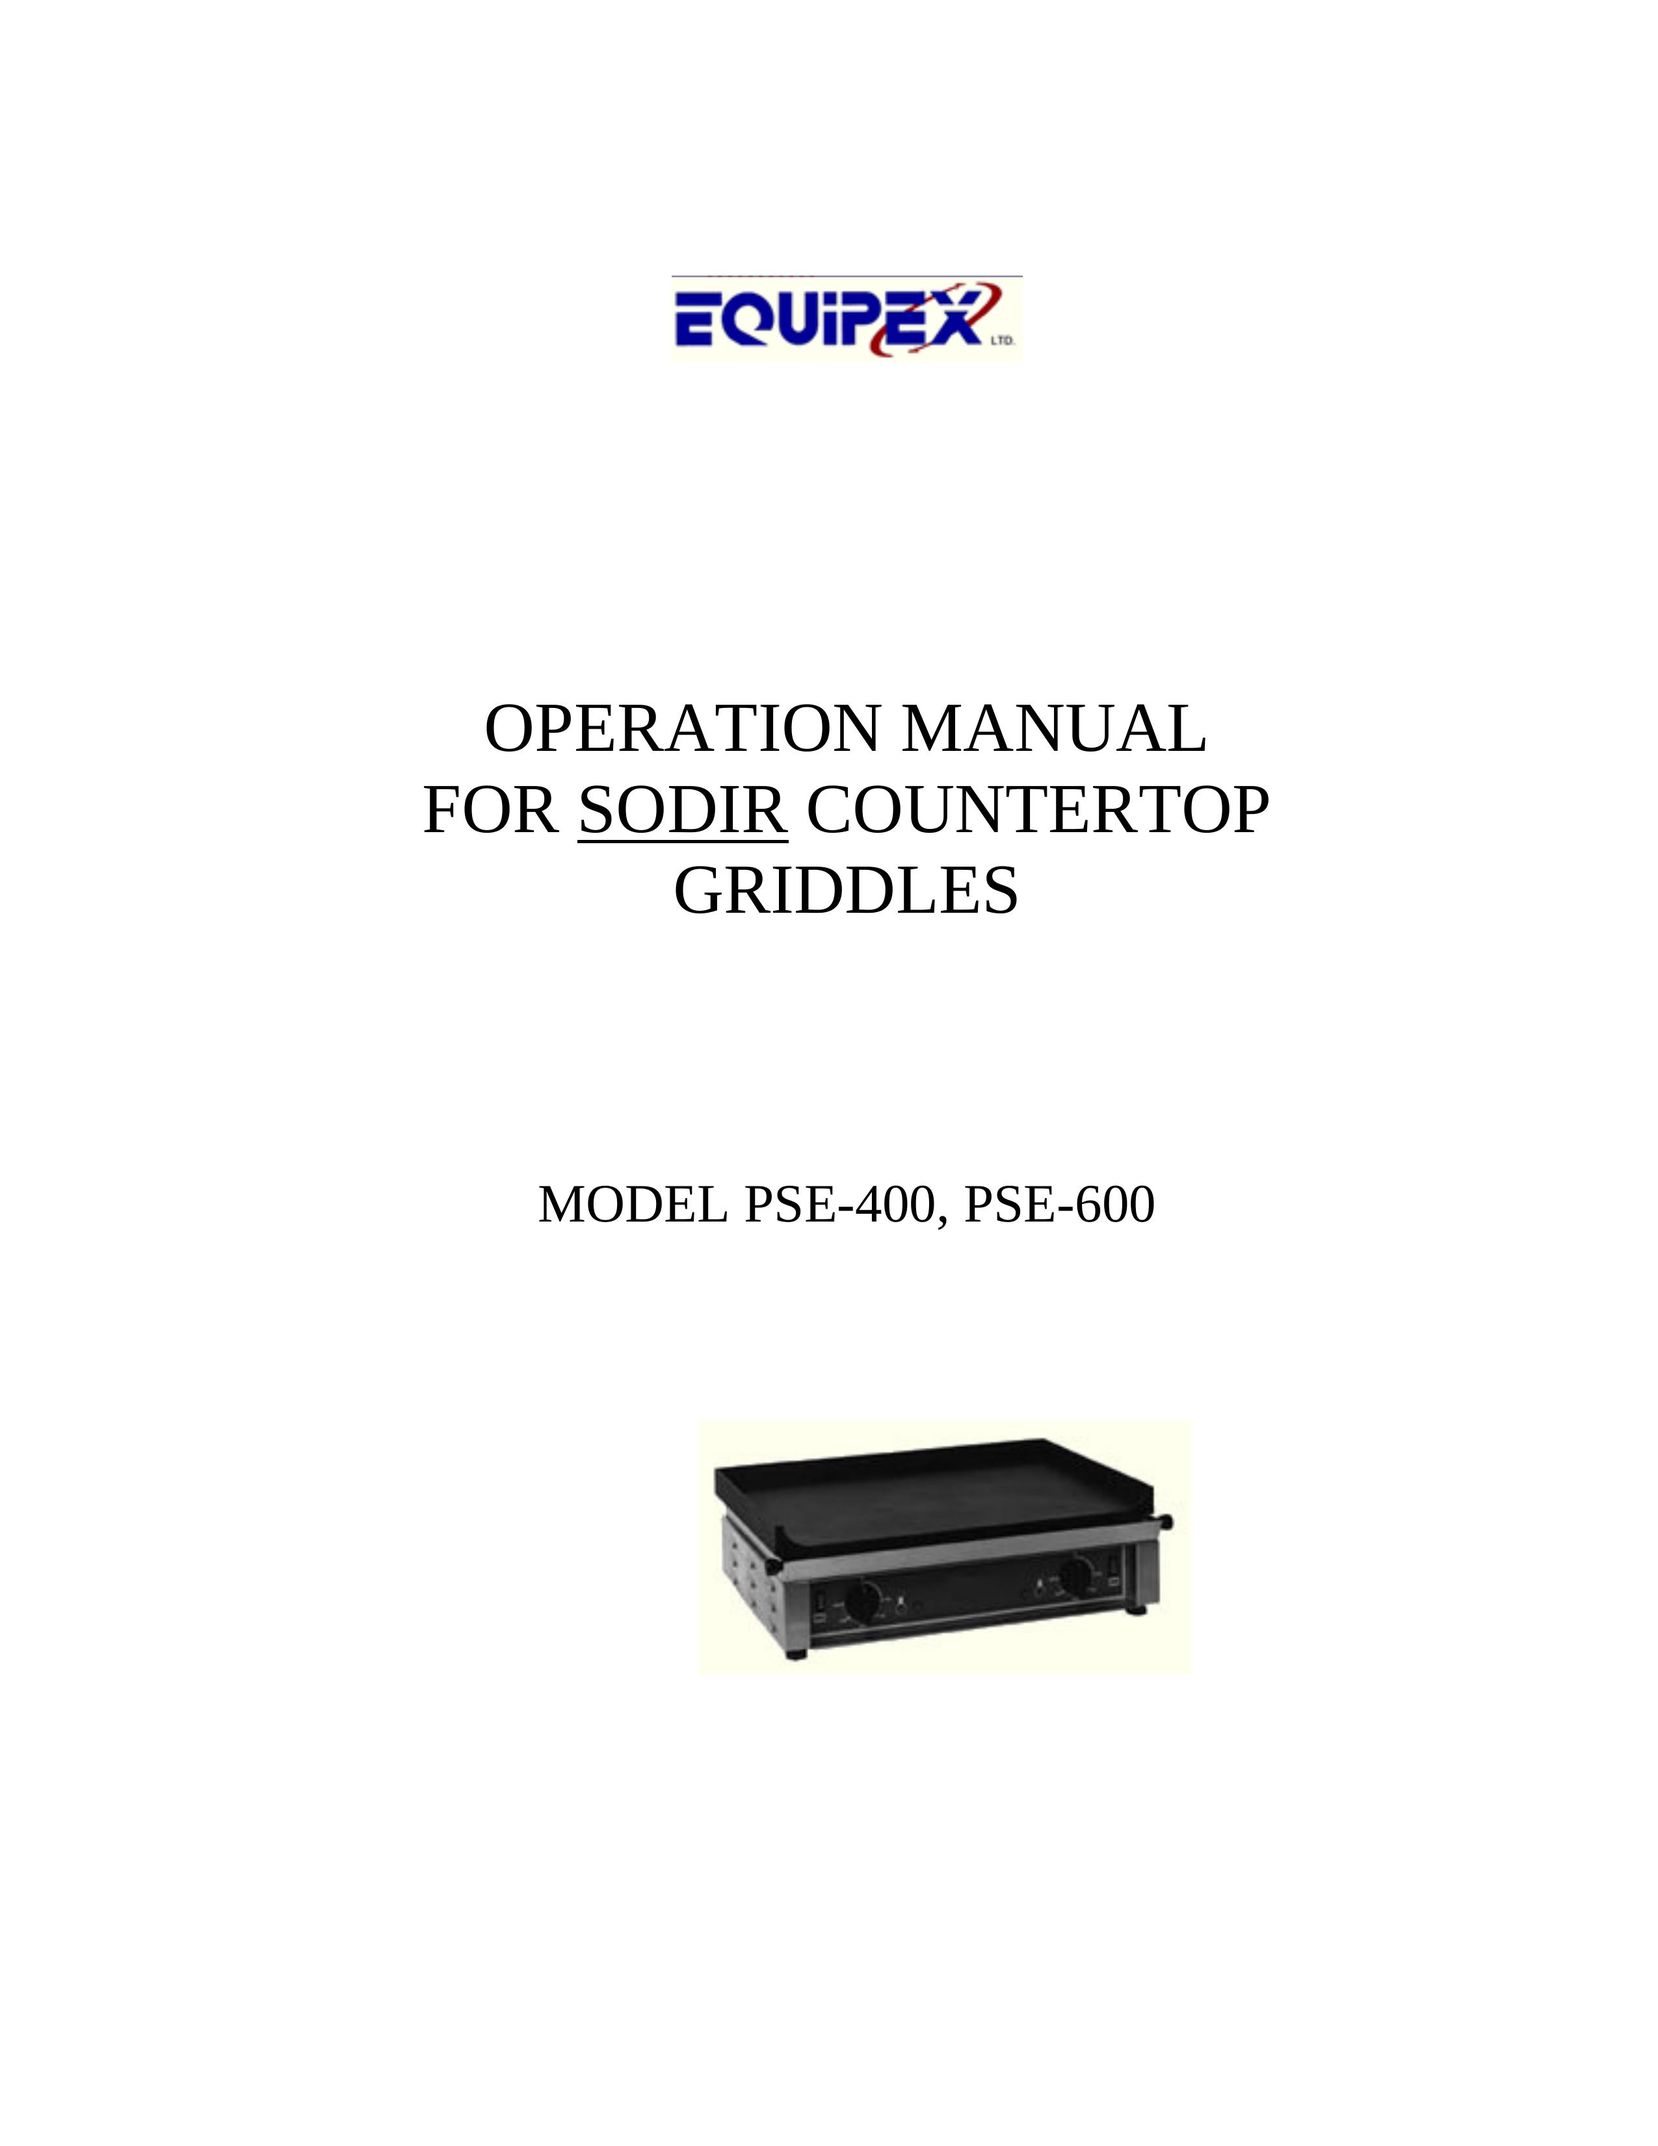 Equipex PSE-600 Griddle User Manual